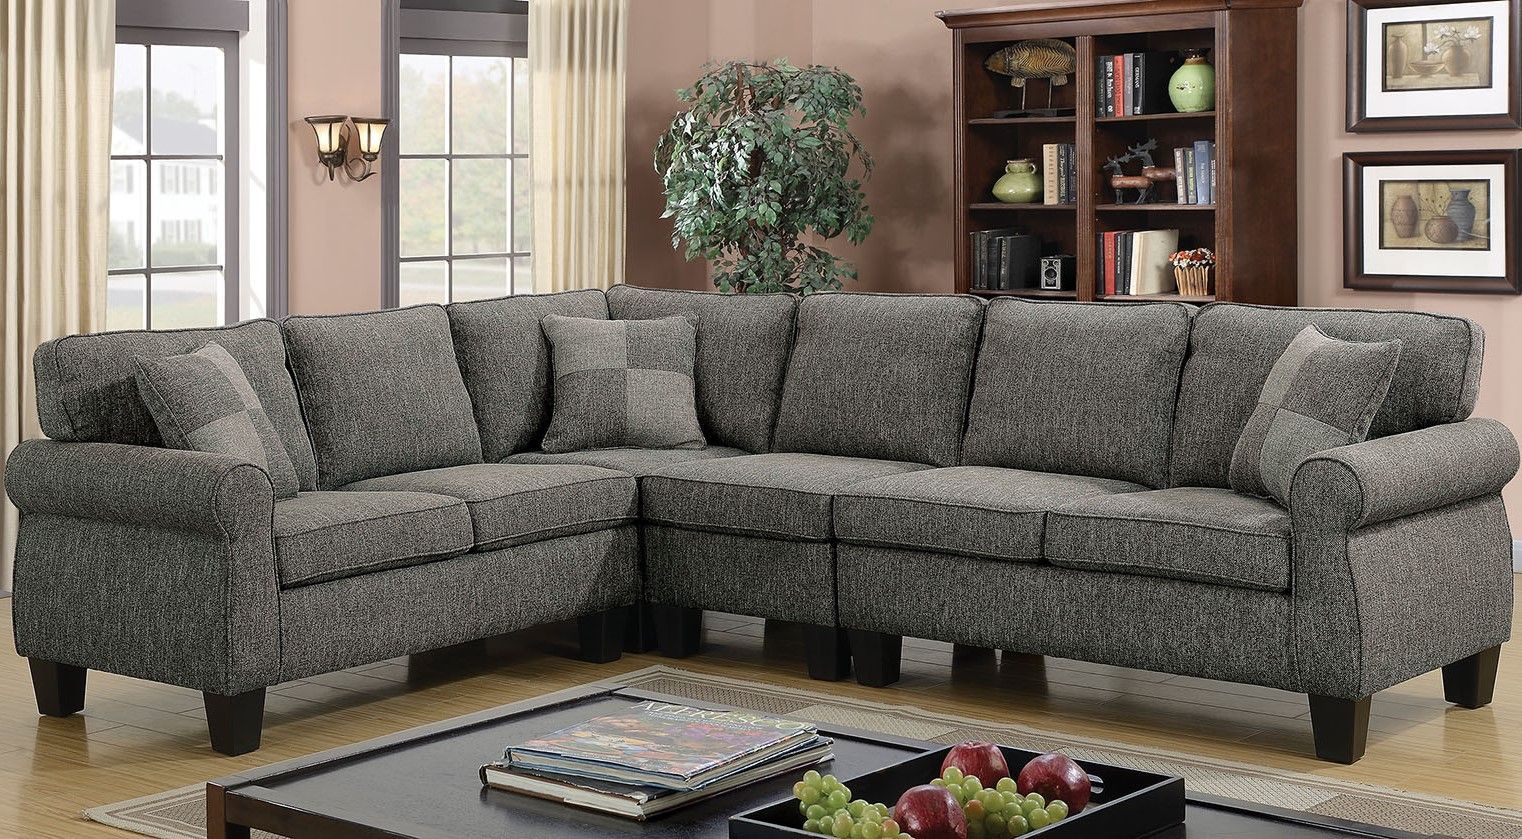 Rhian Transitional Sectional Sofa W/ Pillows In Dark Gray Intended For Sectional Sofas In Gray (View 15 of 15)